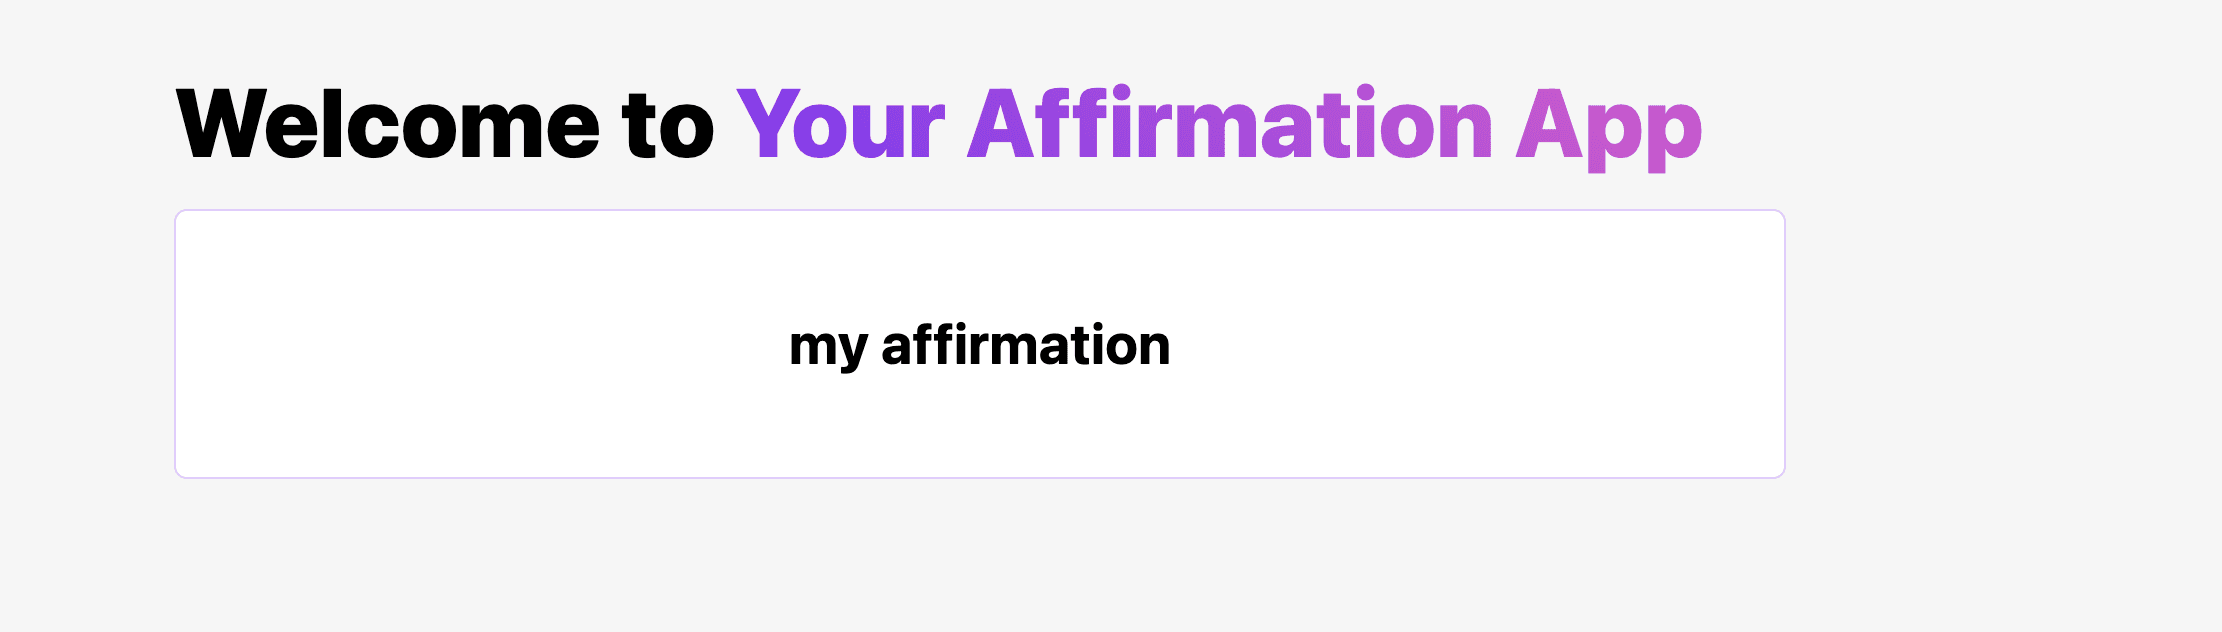 The affirmation app with a hard-coded affirmation